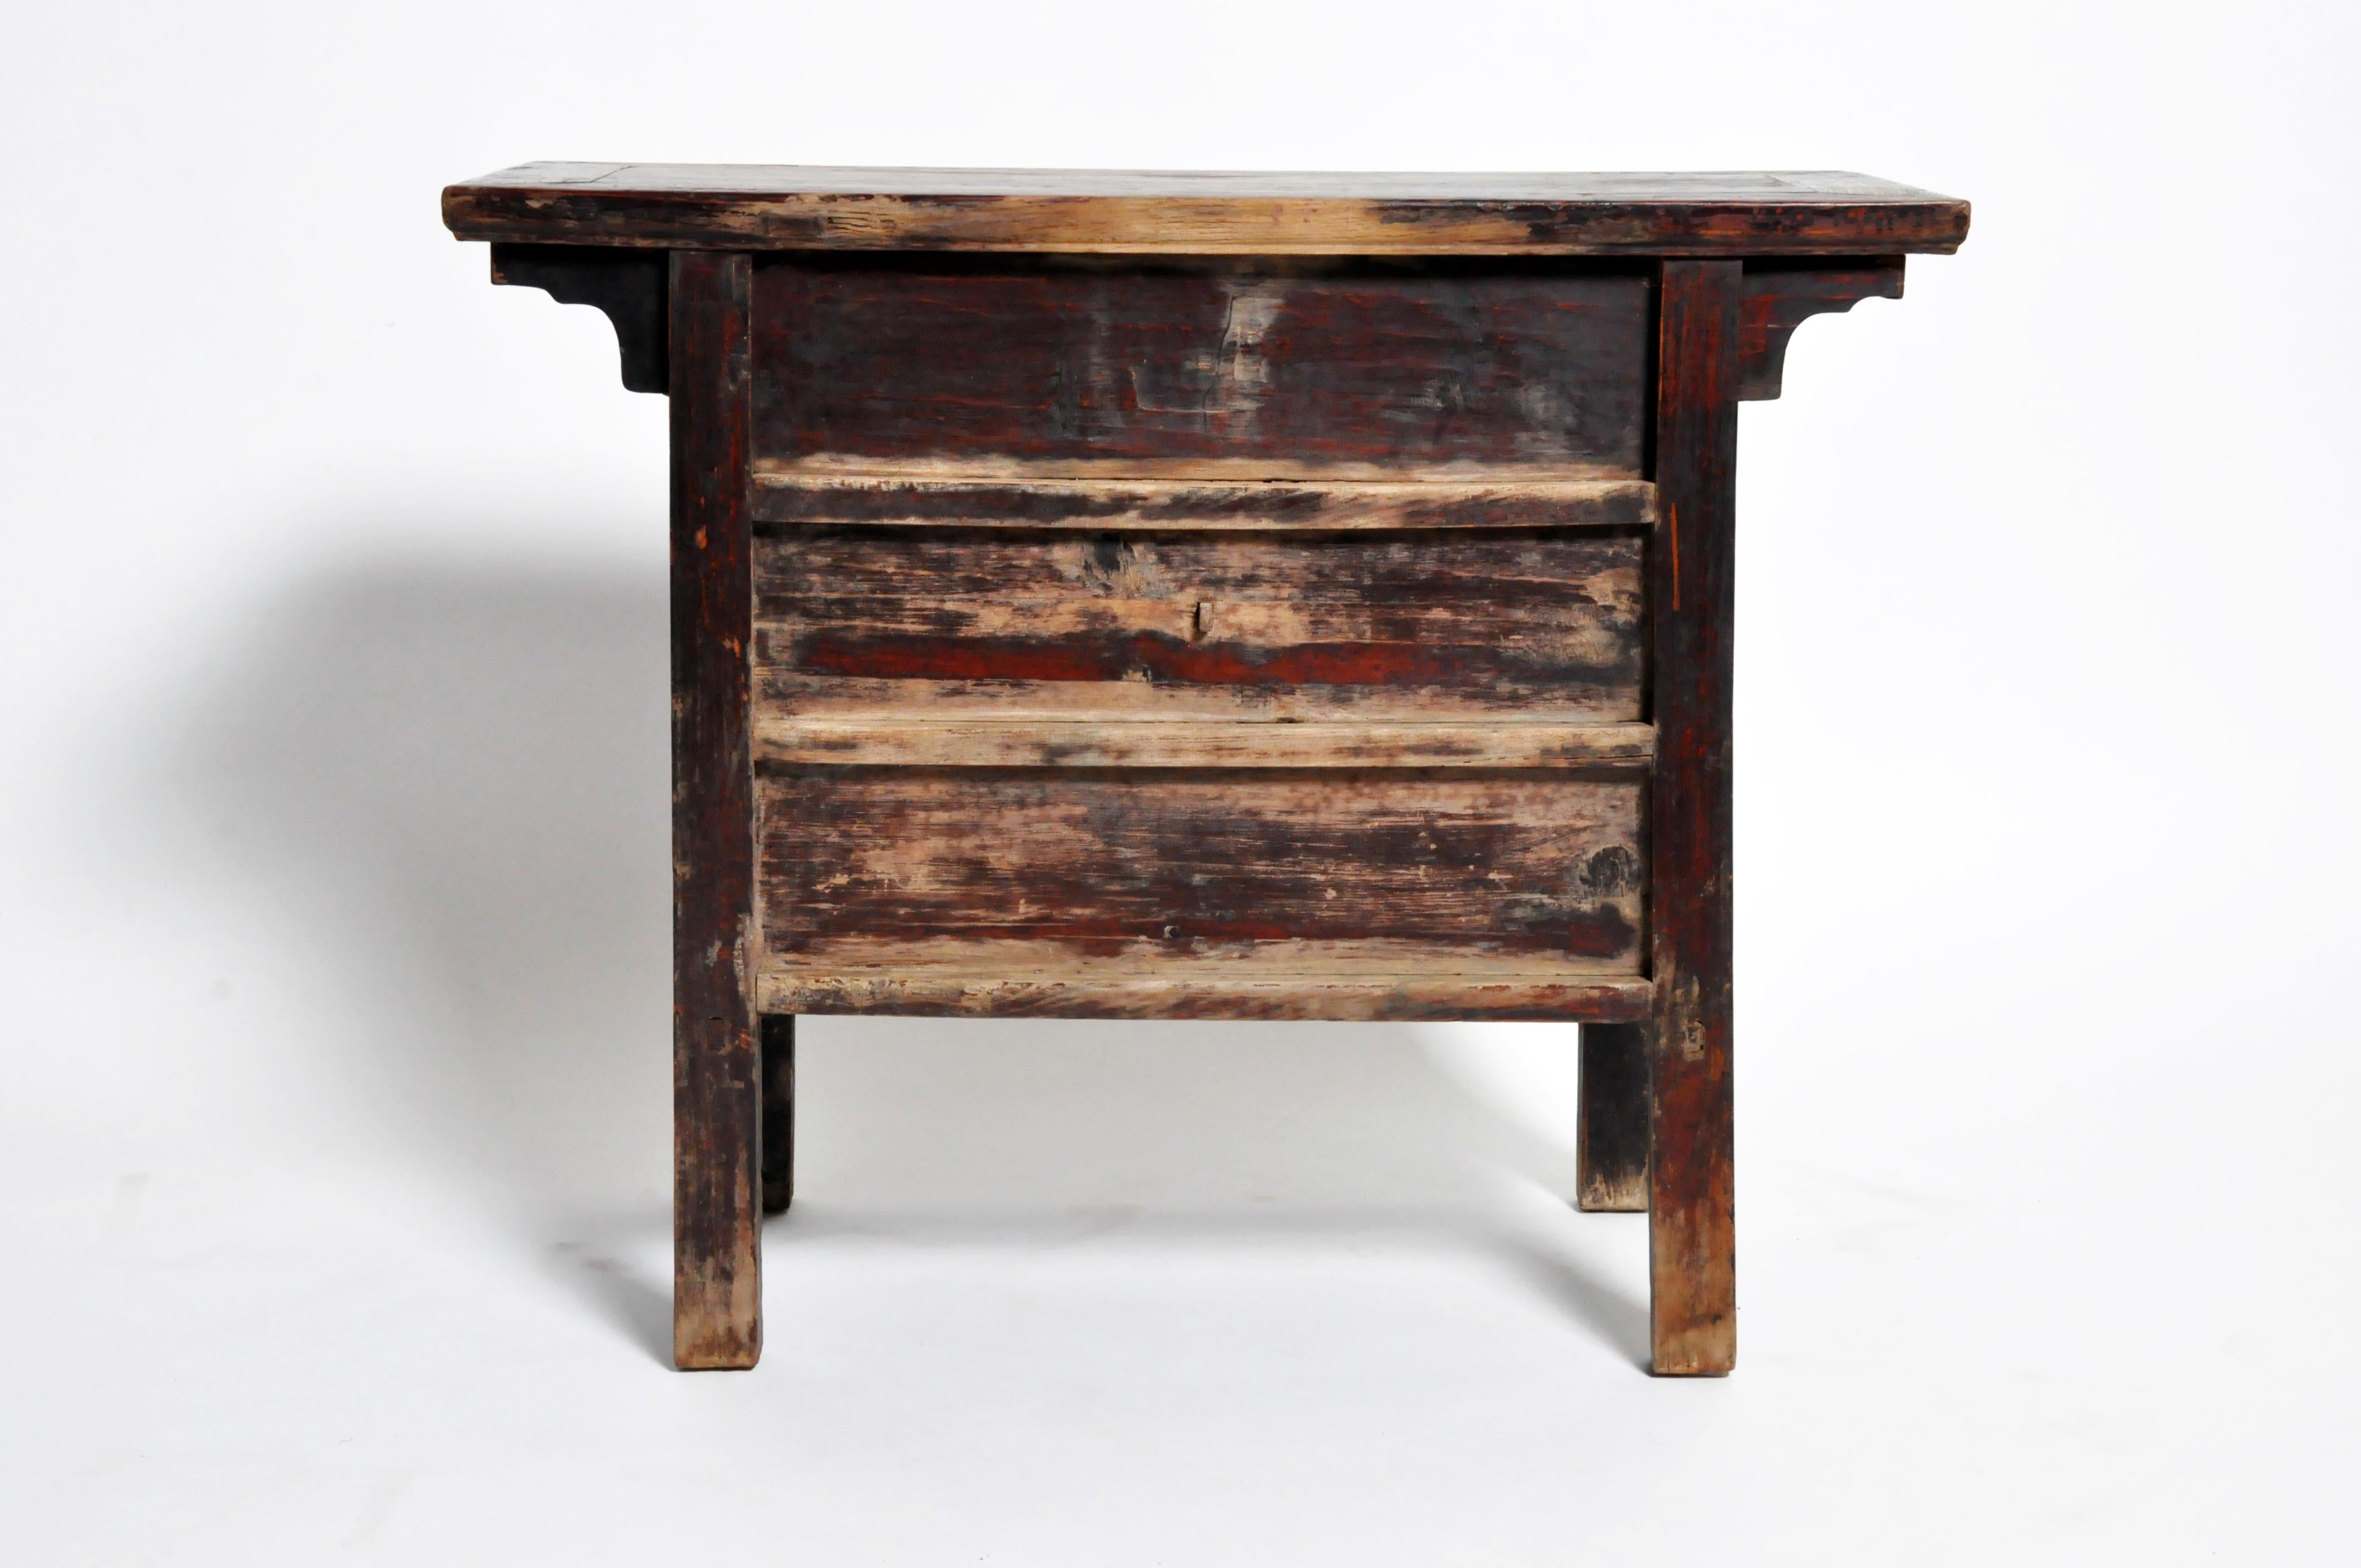 This handsome side chest is from Shanxi, China and made from elmwood, circa Qing dynasty (early 1800s). The piece features three drawers, intricate hard-carved details, and its original oxblood lacquer patina. The finish is completely original-